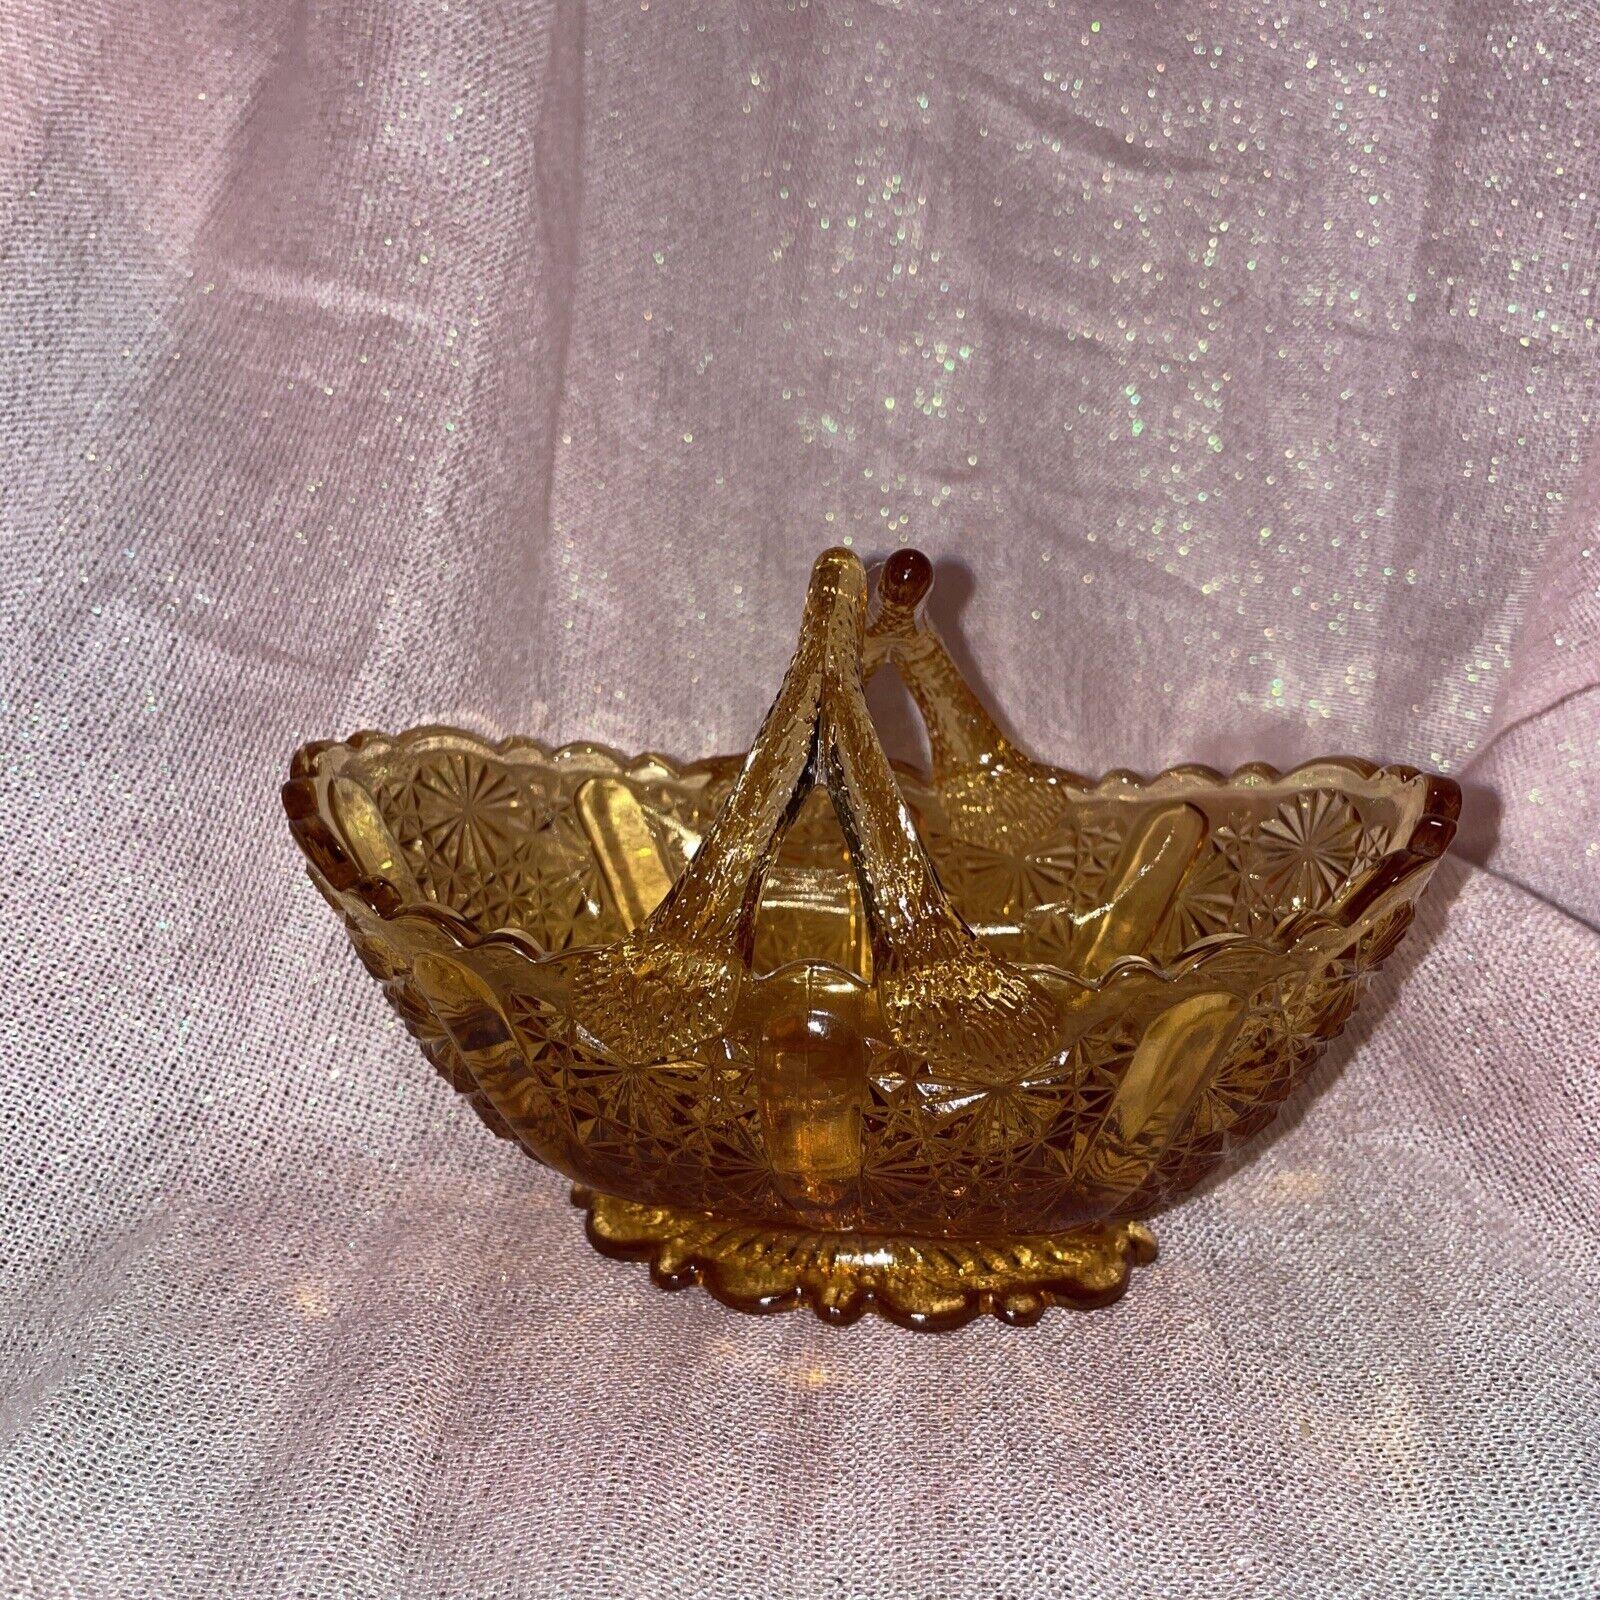 FENTON AMBER GLASS BASKET DAISY AND BUTTON PATTERN WITH SPLIT HANDLES